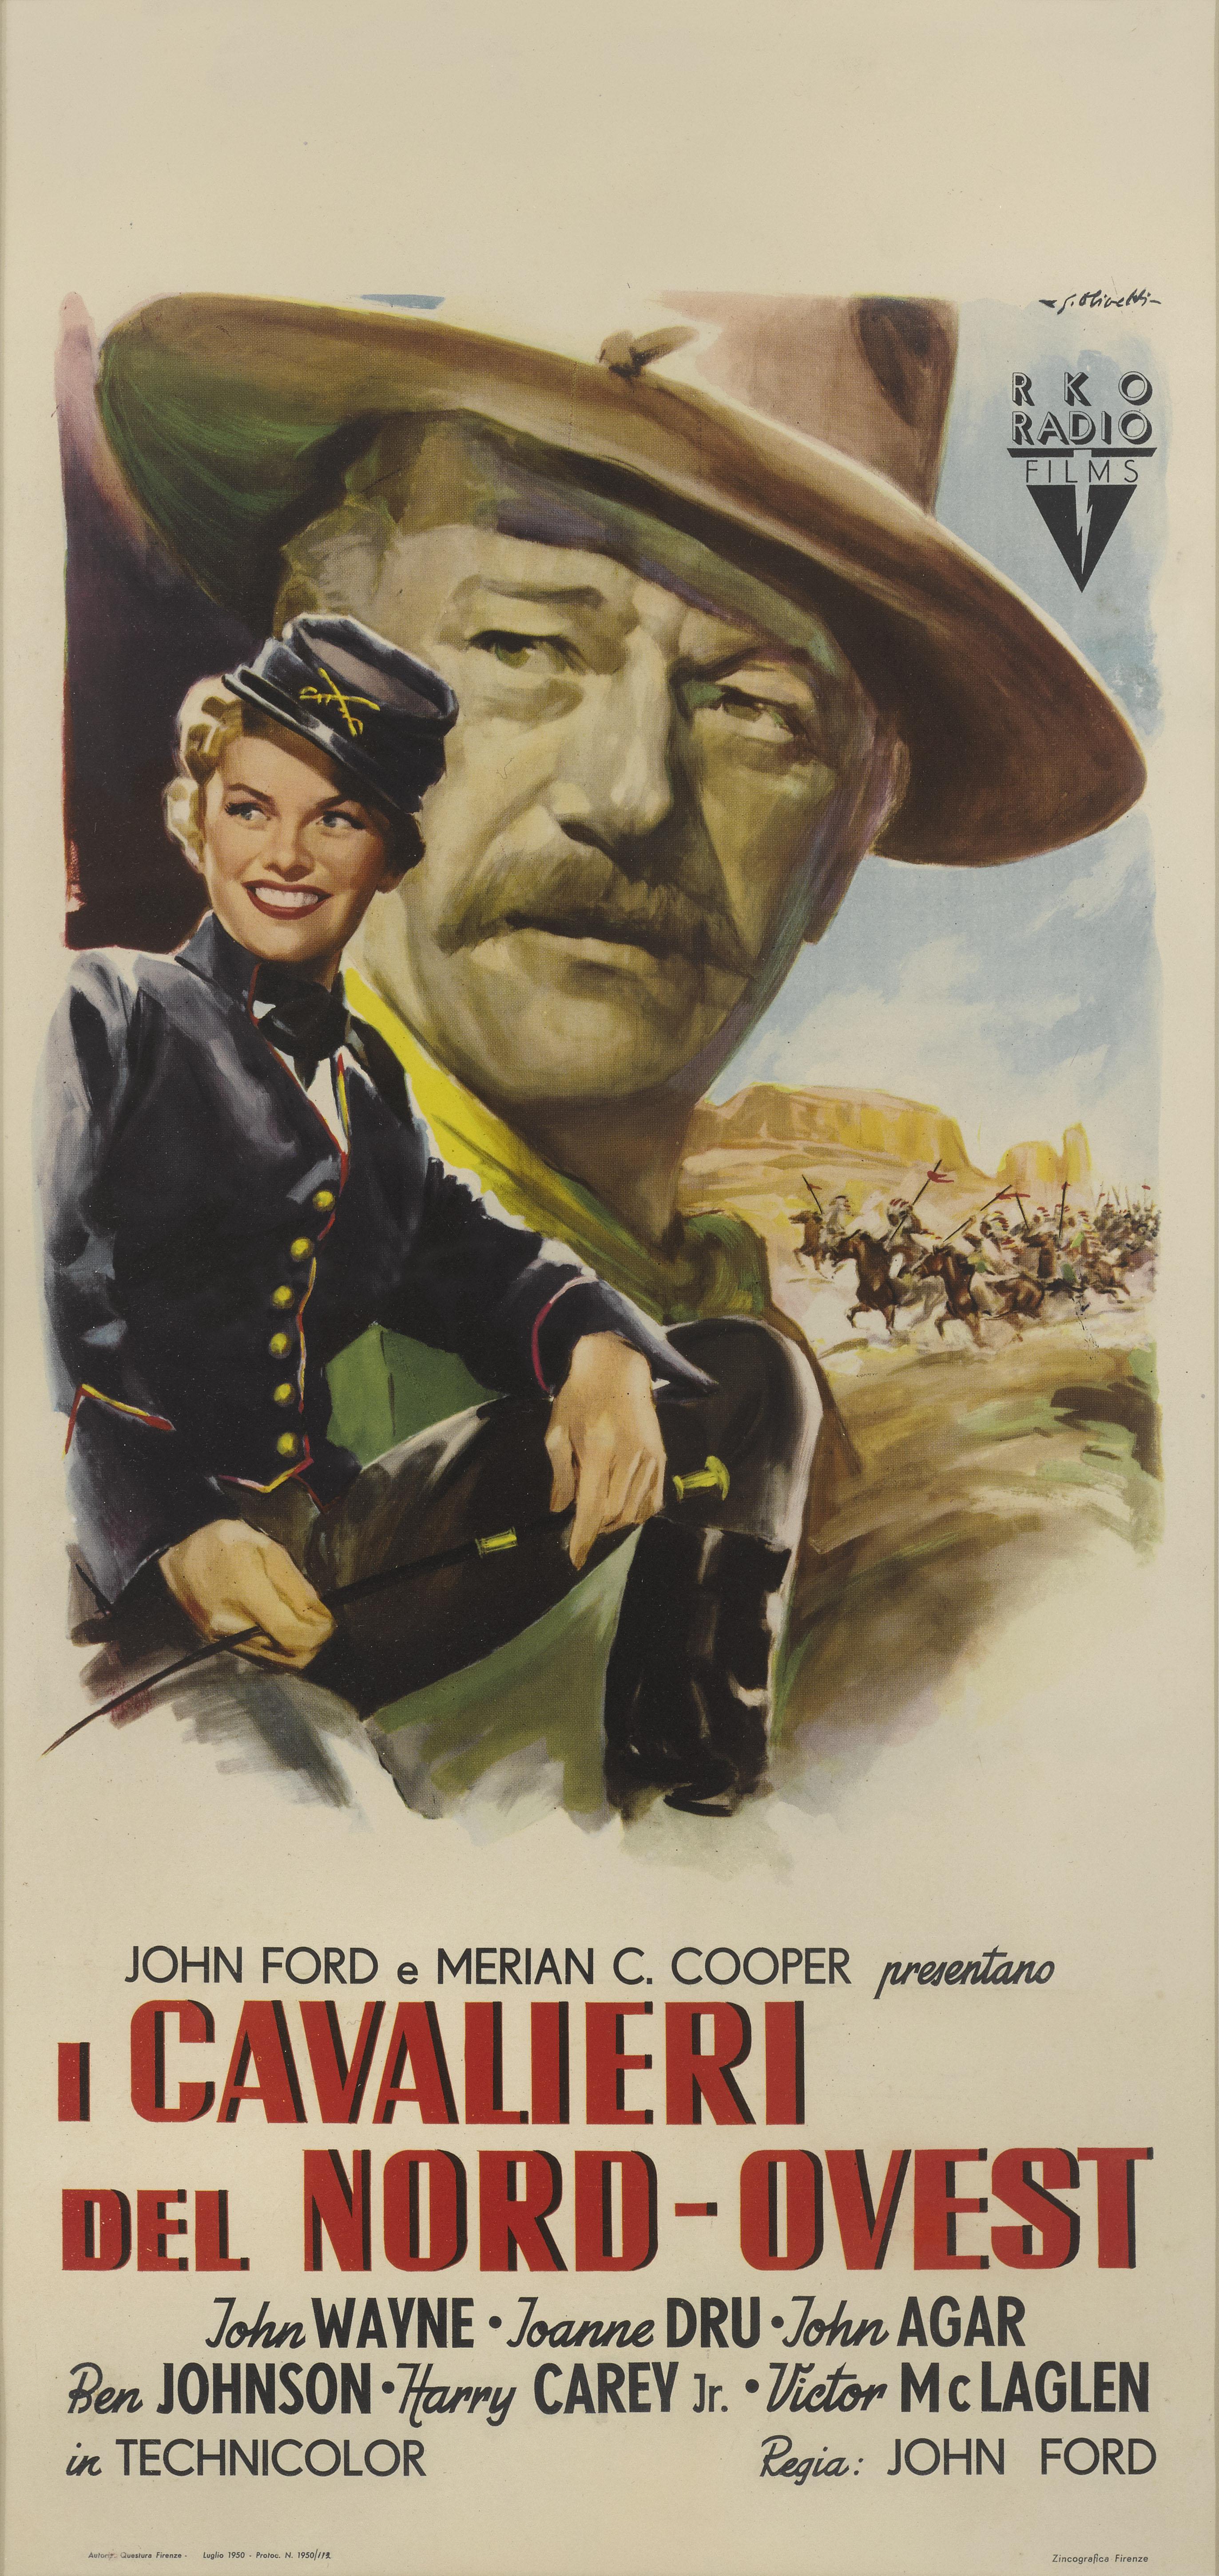 Original Italian film poster for the film She Wore a Yellow Ribbon 1949.
This western was directed by John Ford, and stars John Wayne, Joanne Dru and John Agar.
This poster was designed for the films first Italian release 1950.
The size given is